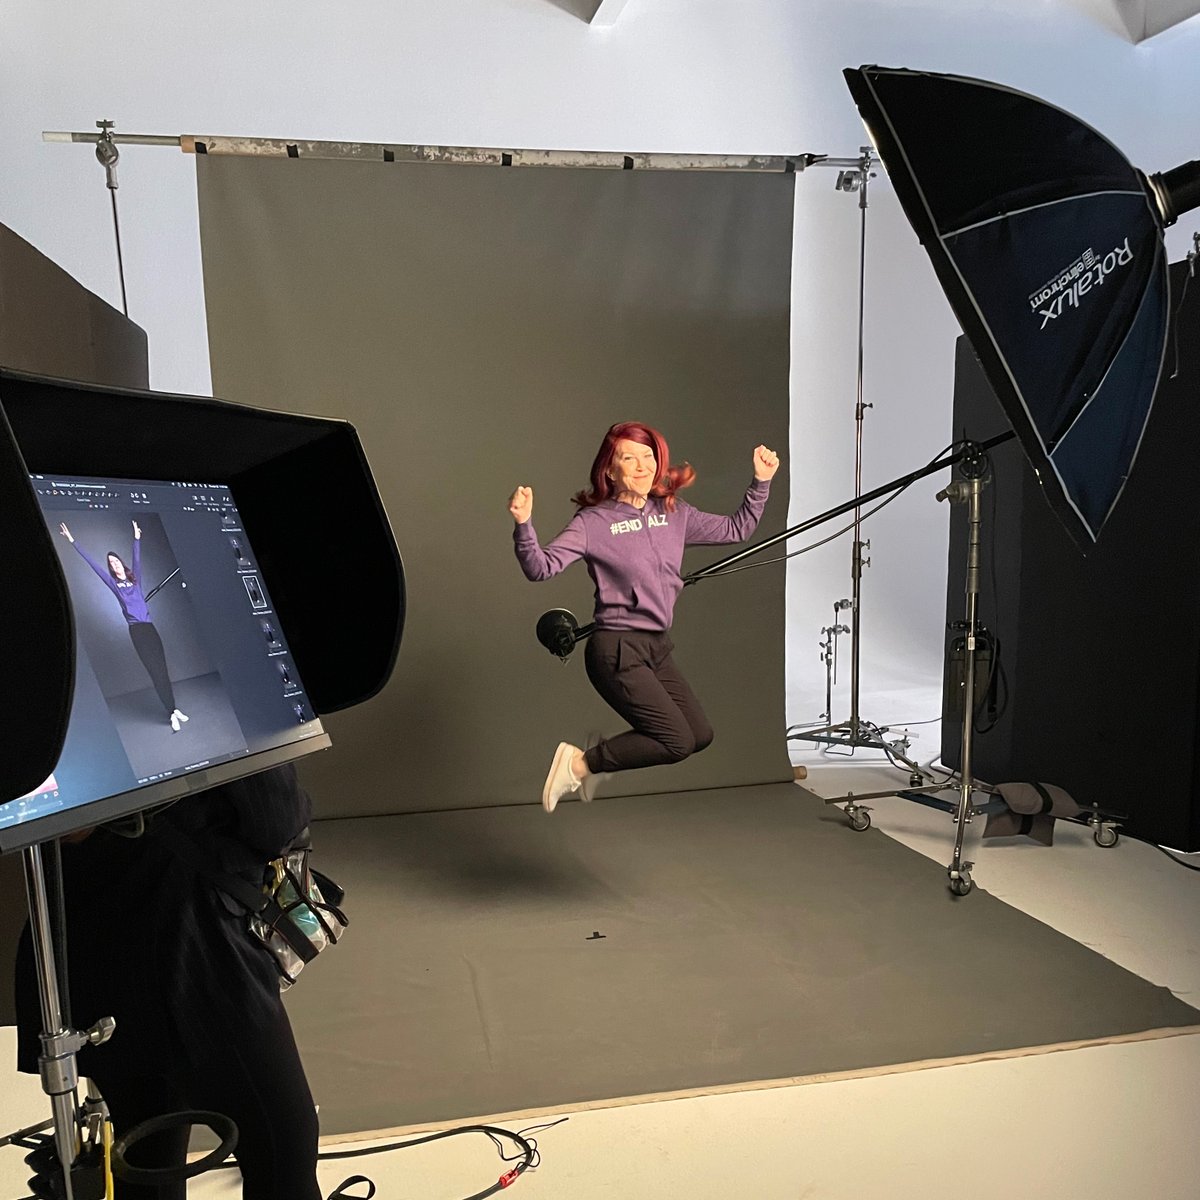 #TheOffice star @KateFlannery is taking the fight to end Alzheimer’s to new heights! Thank you, Kate, for joining us at this year’s #ENDALZ Celebrity Champion photo shoot to raise awareness in honor of your godmother.